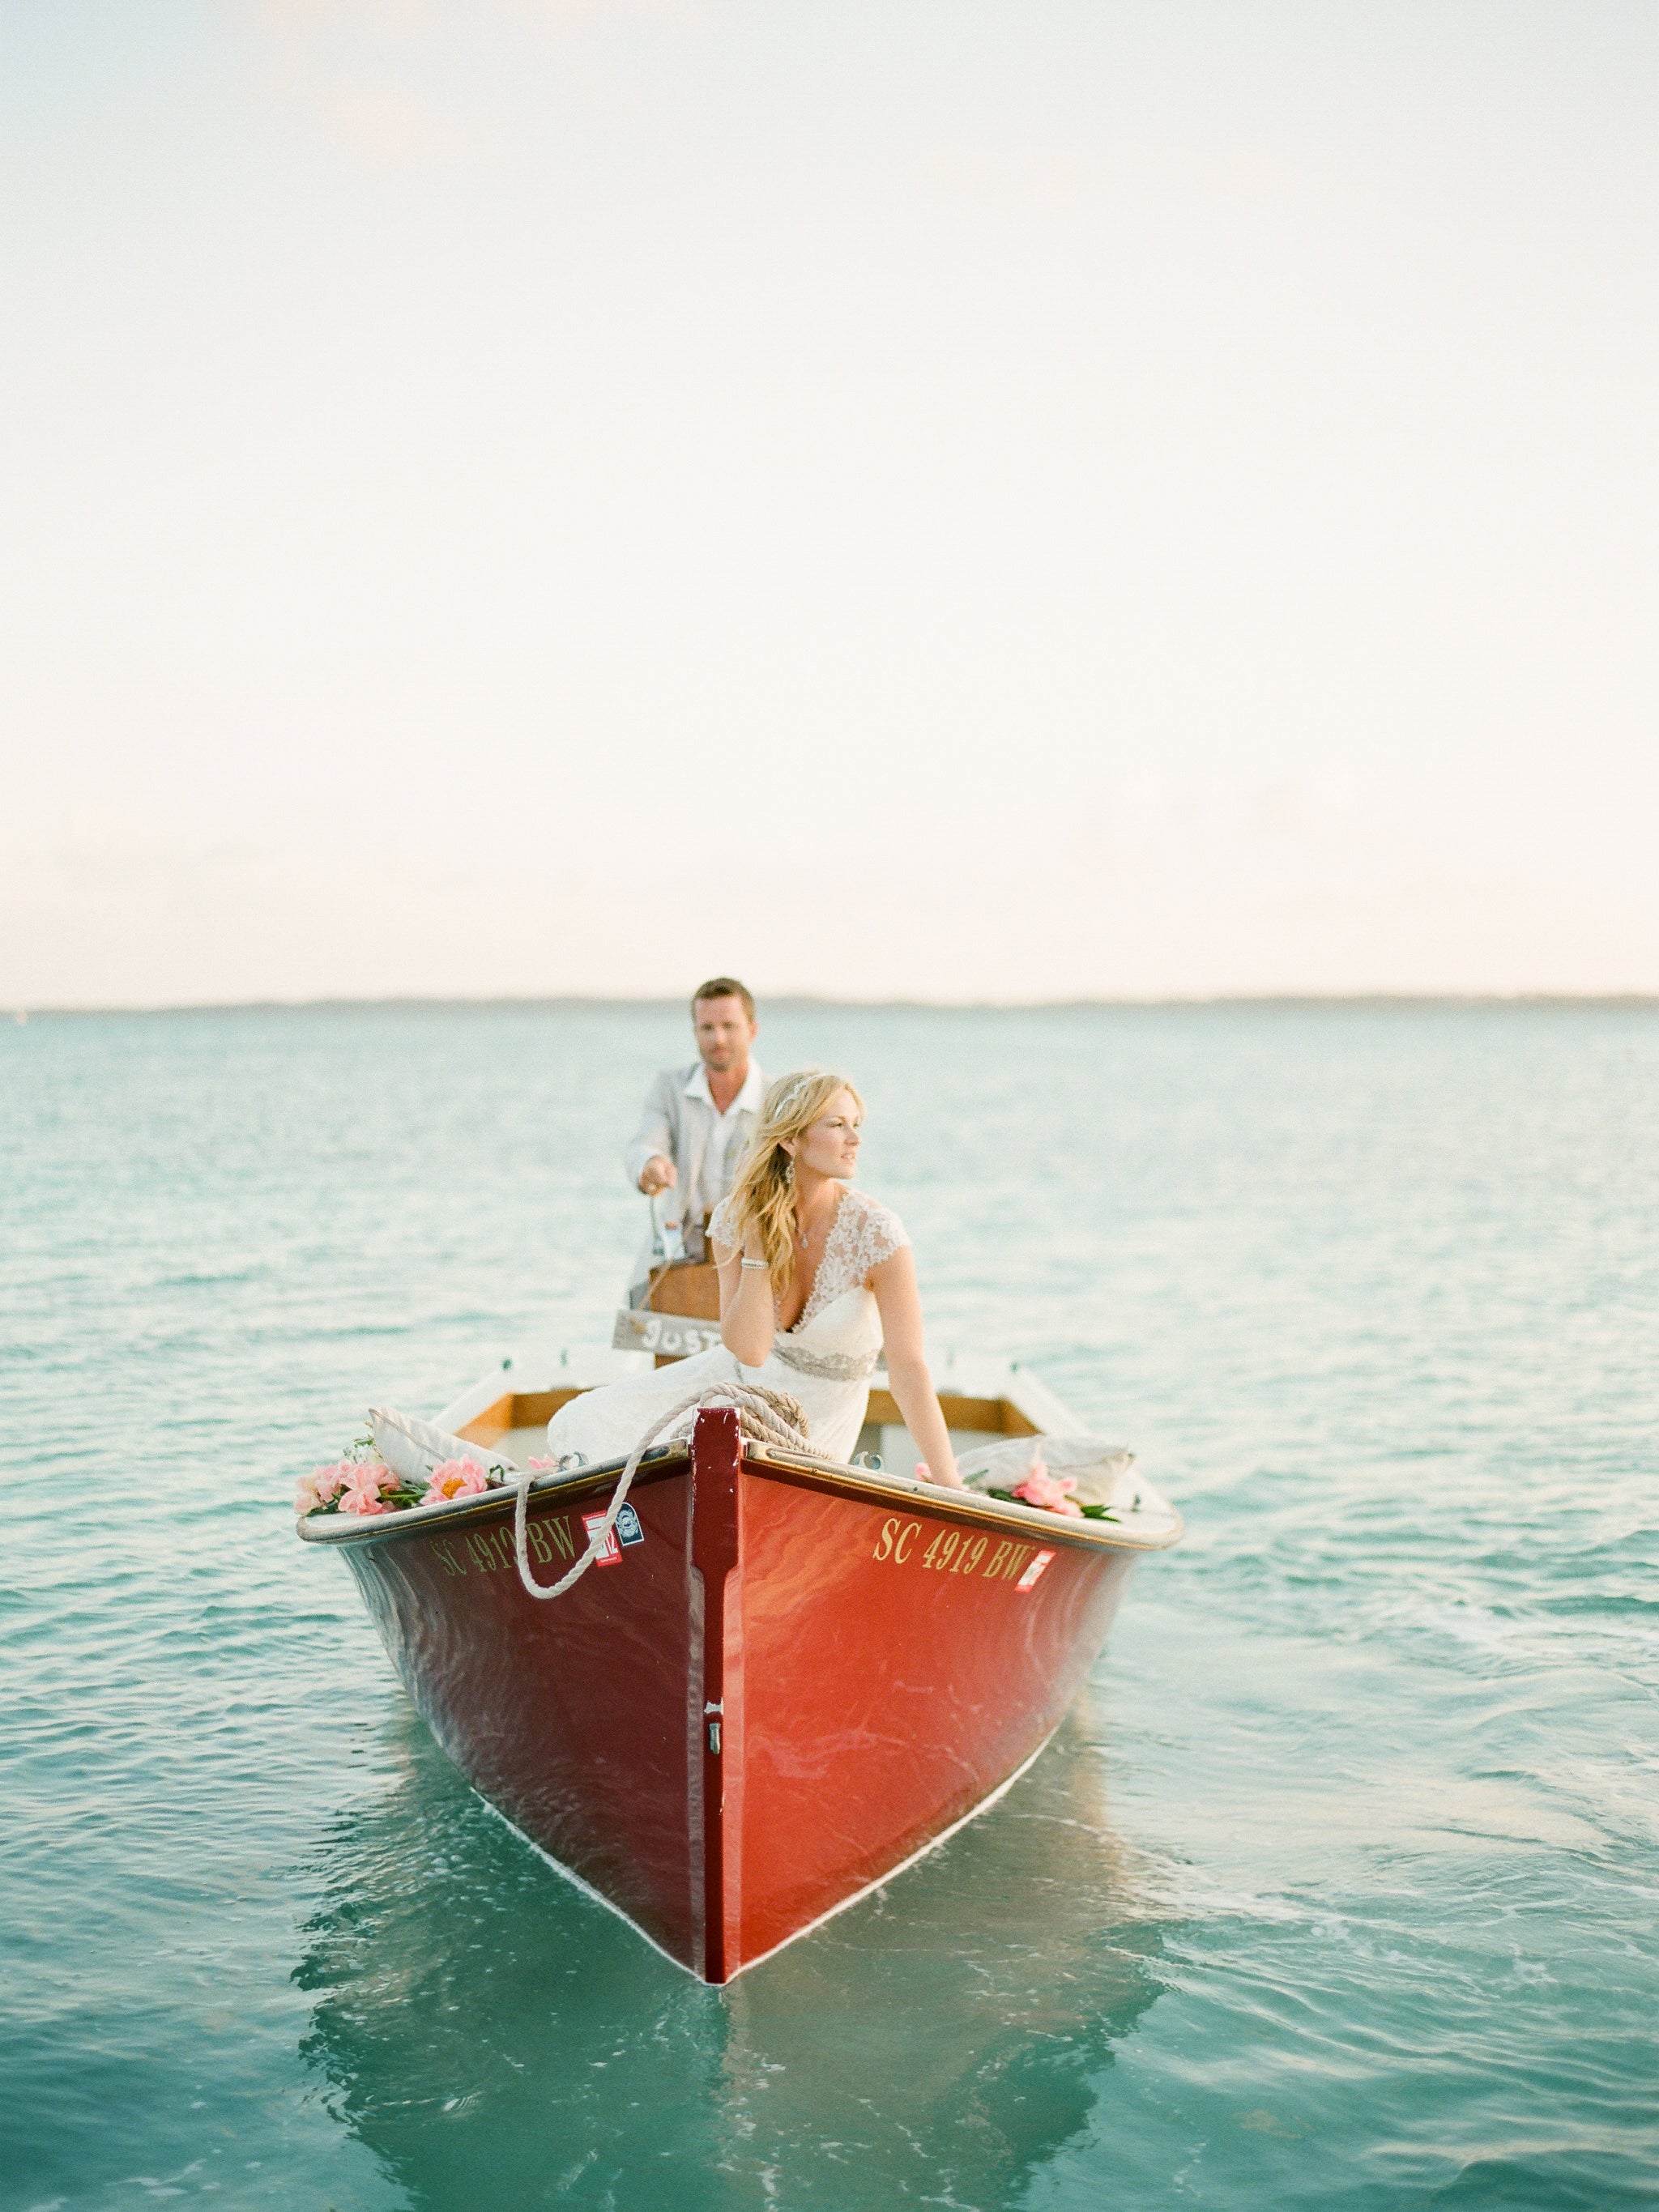 Couples Are Flocking to These 11 Popular Destinations to Get Hitched